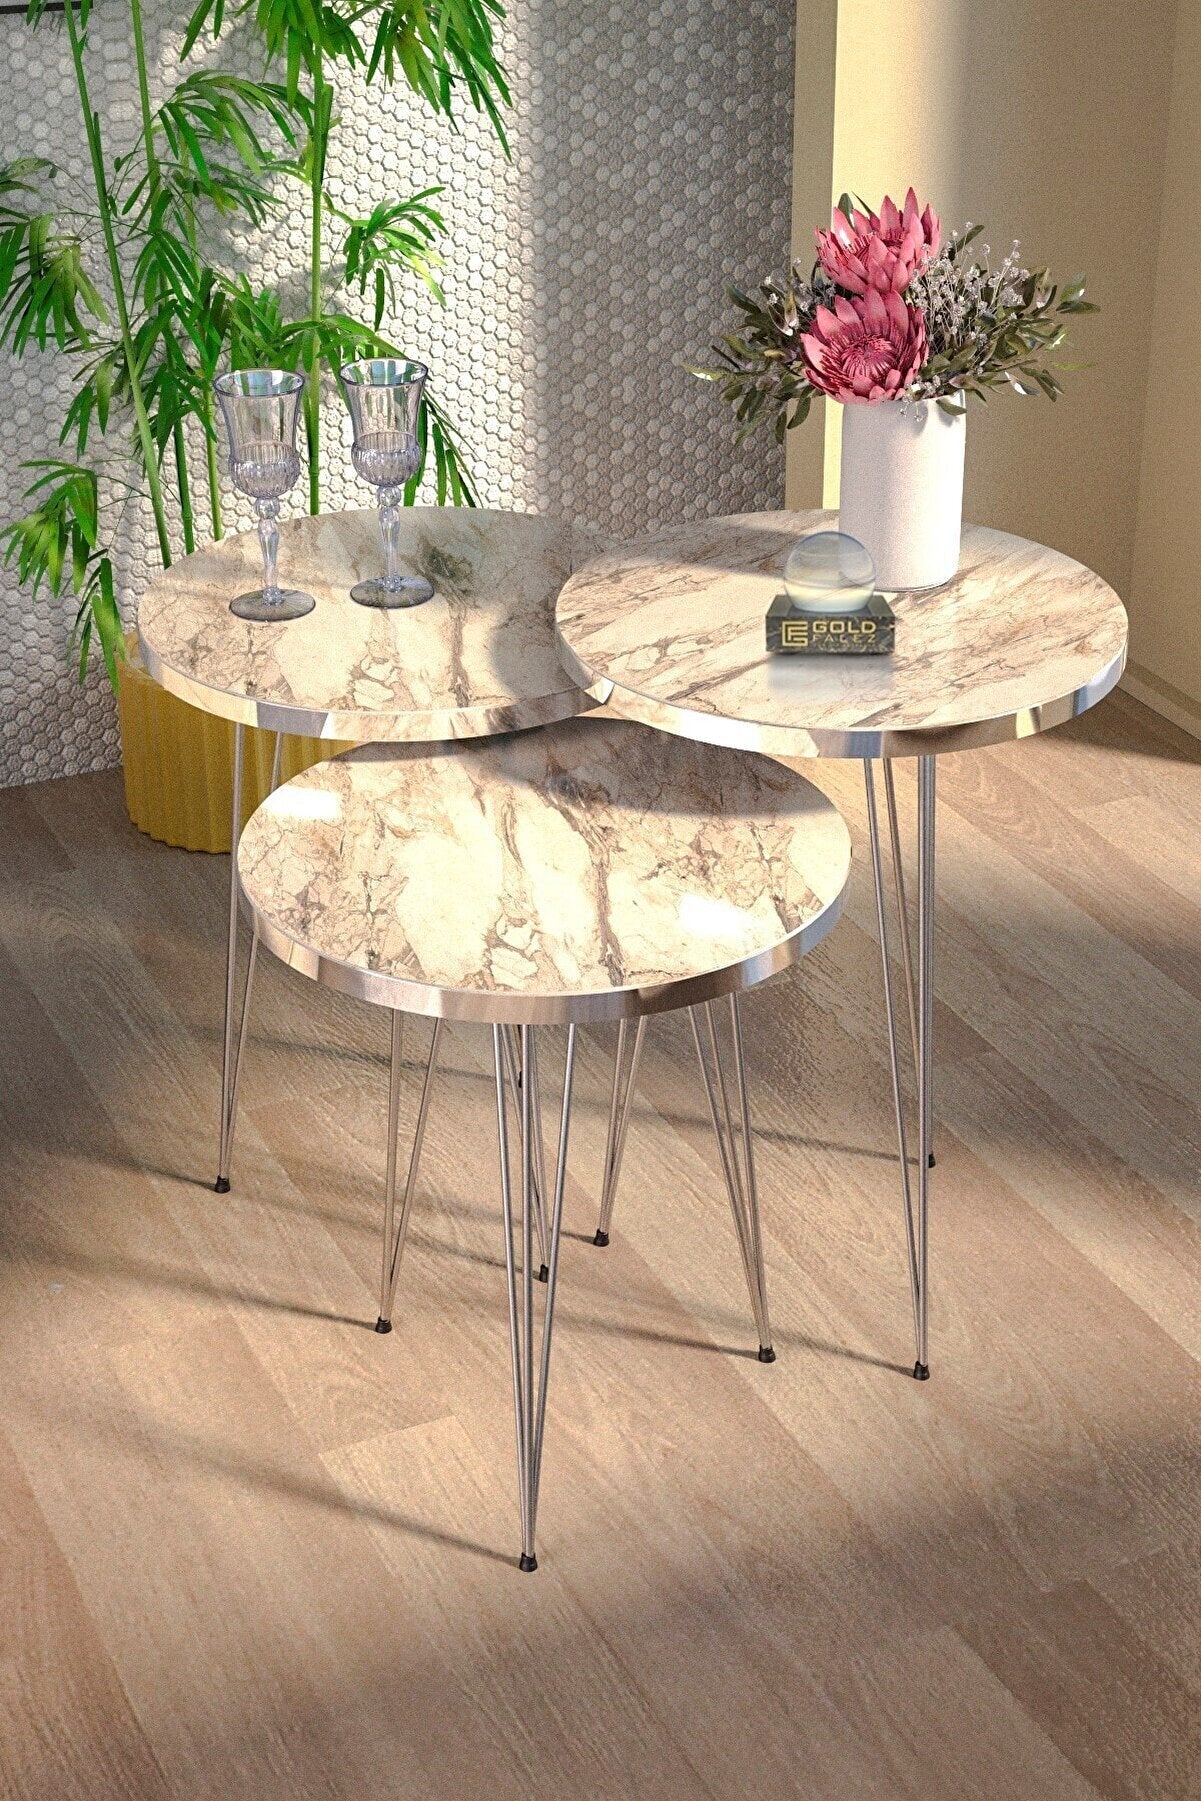 3 PCs silver legs Modern nesting table gold look furniture tea coffee service desk round living room bedside table | Decor Gifts and More